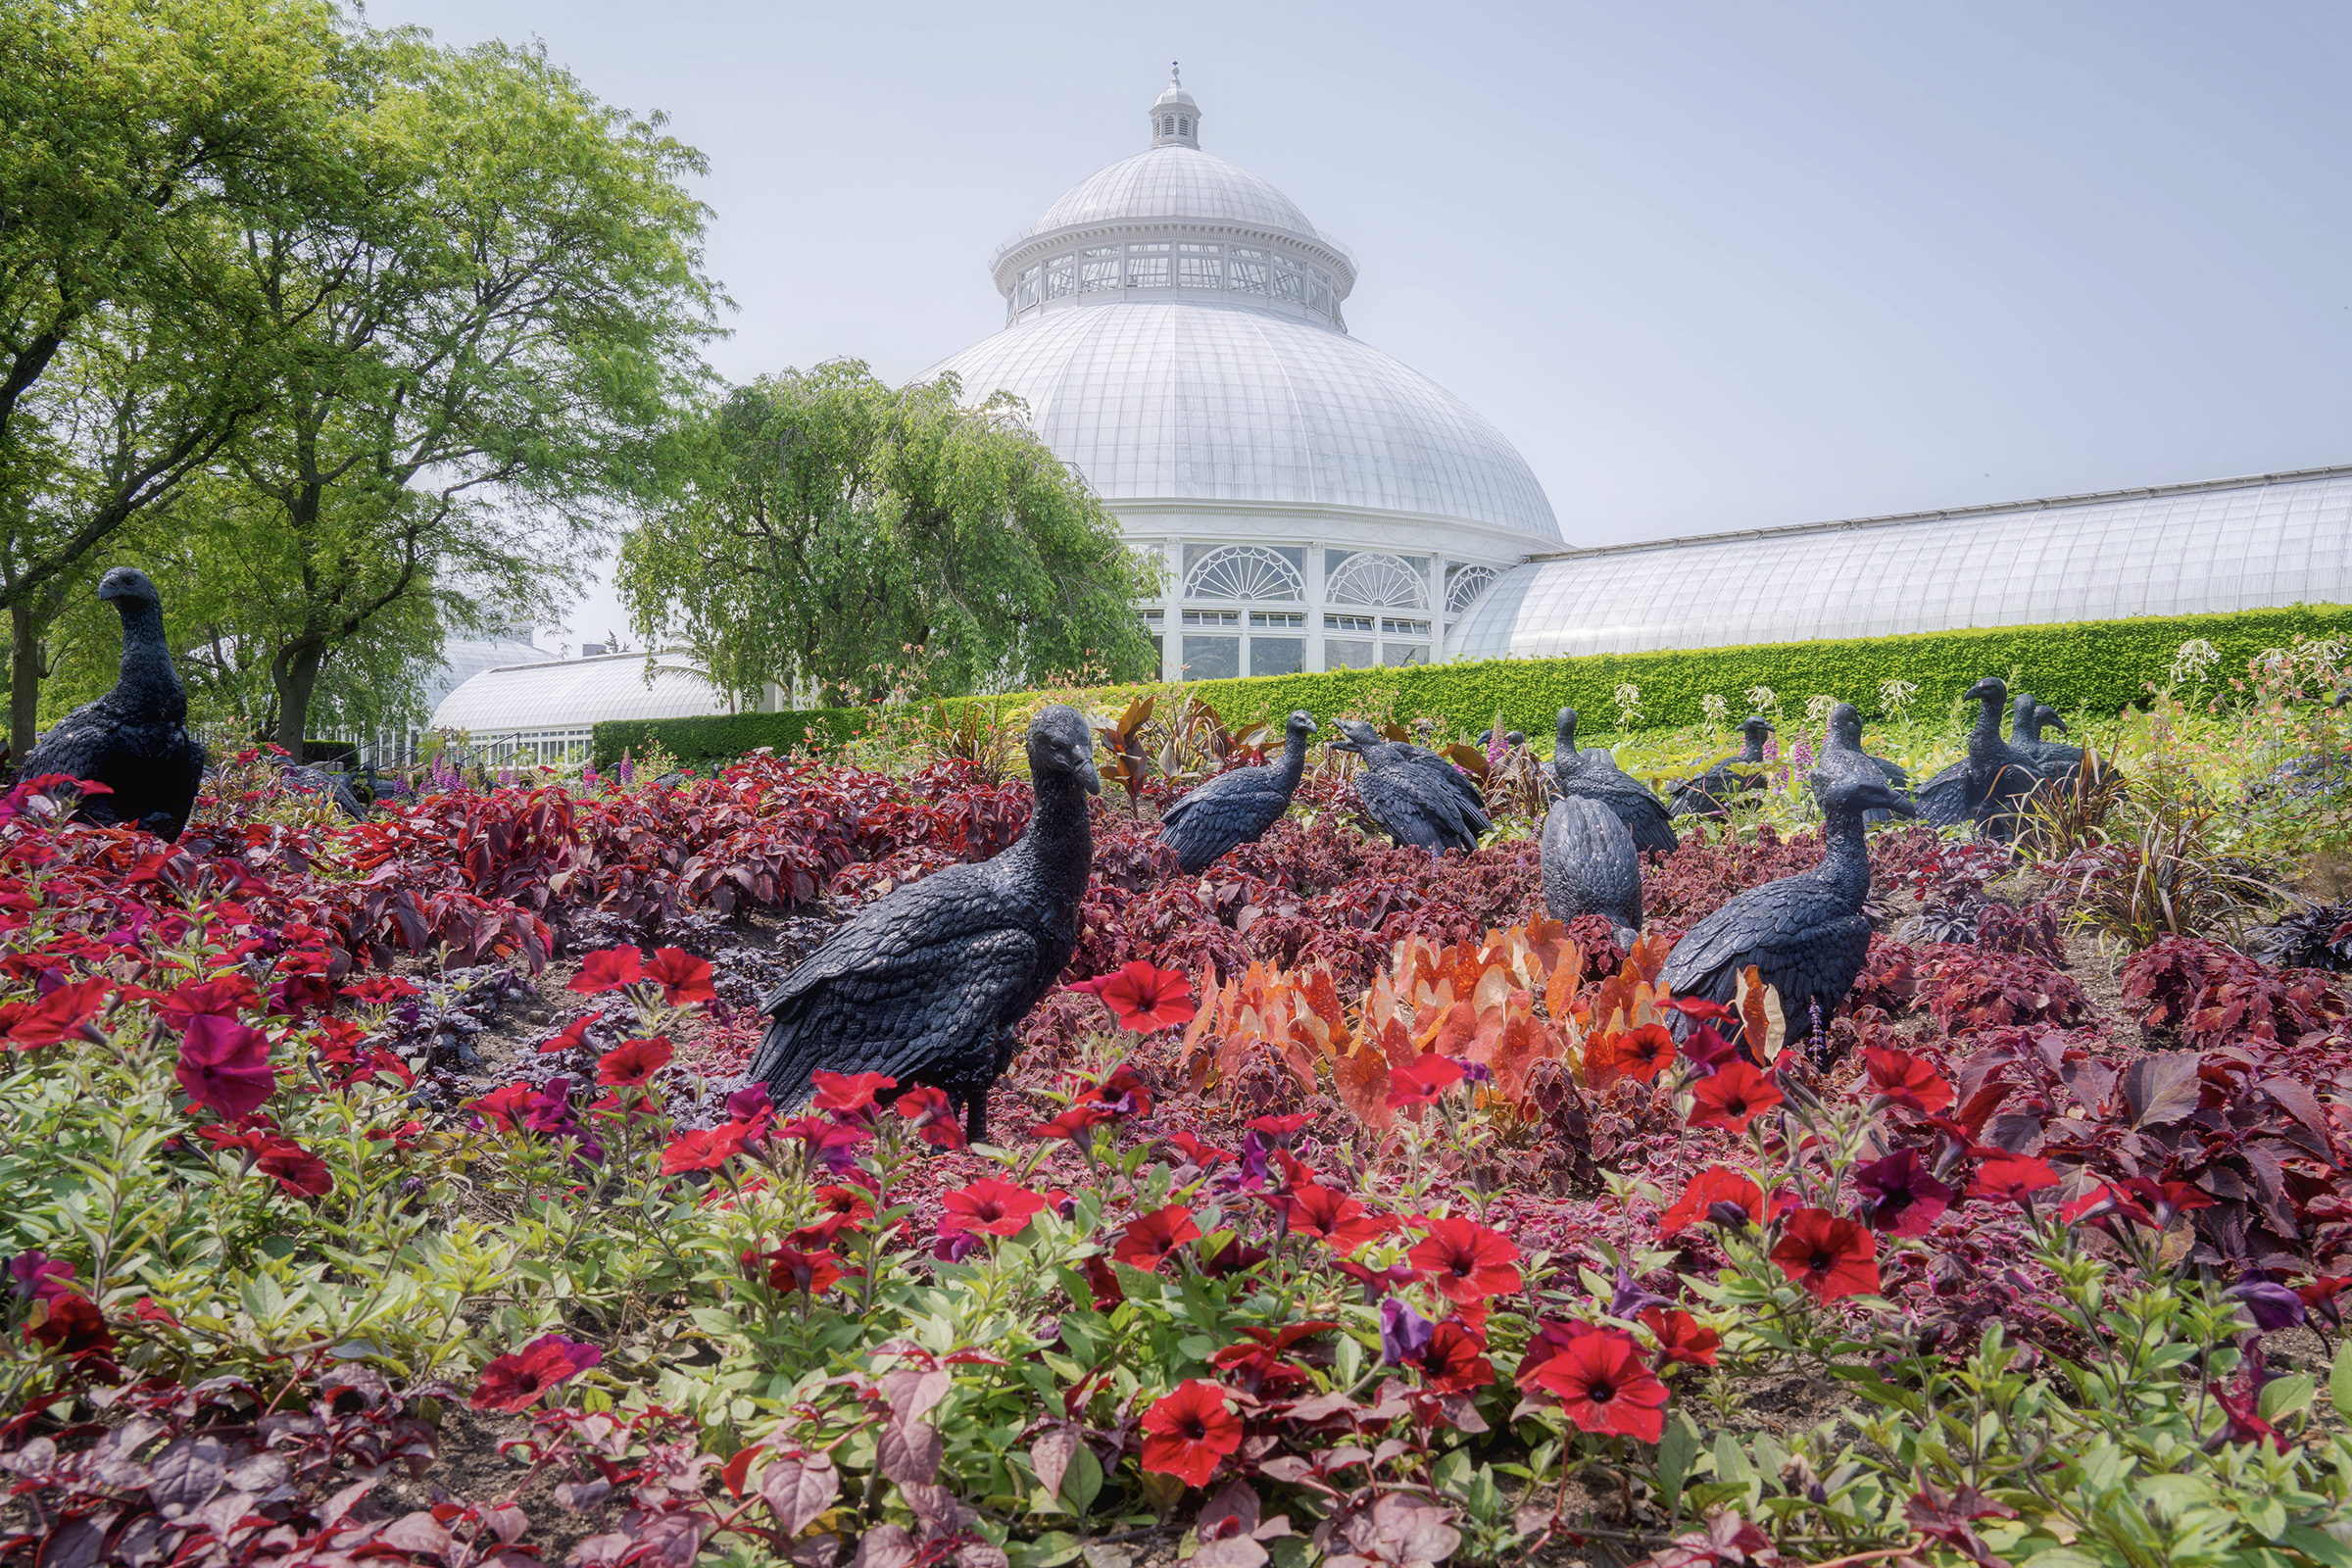 NYBG’s new thought-provoking exhibit combines sculpture and horticulture